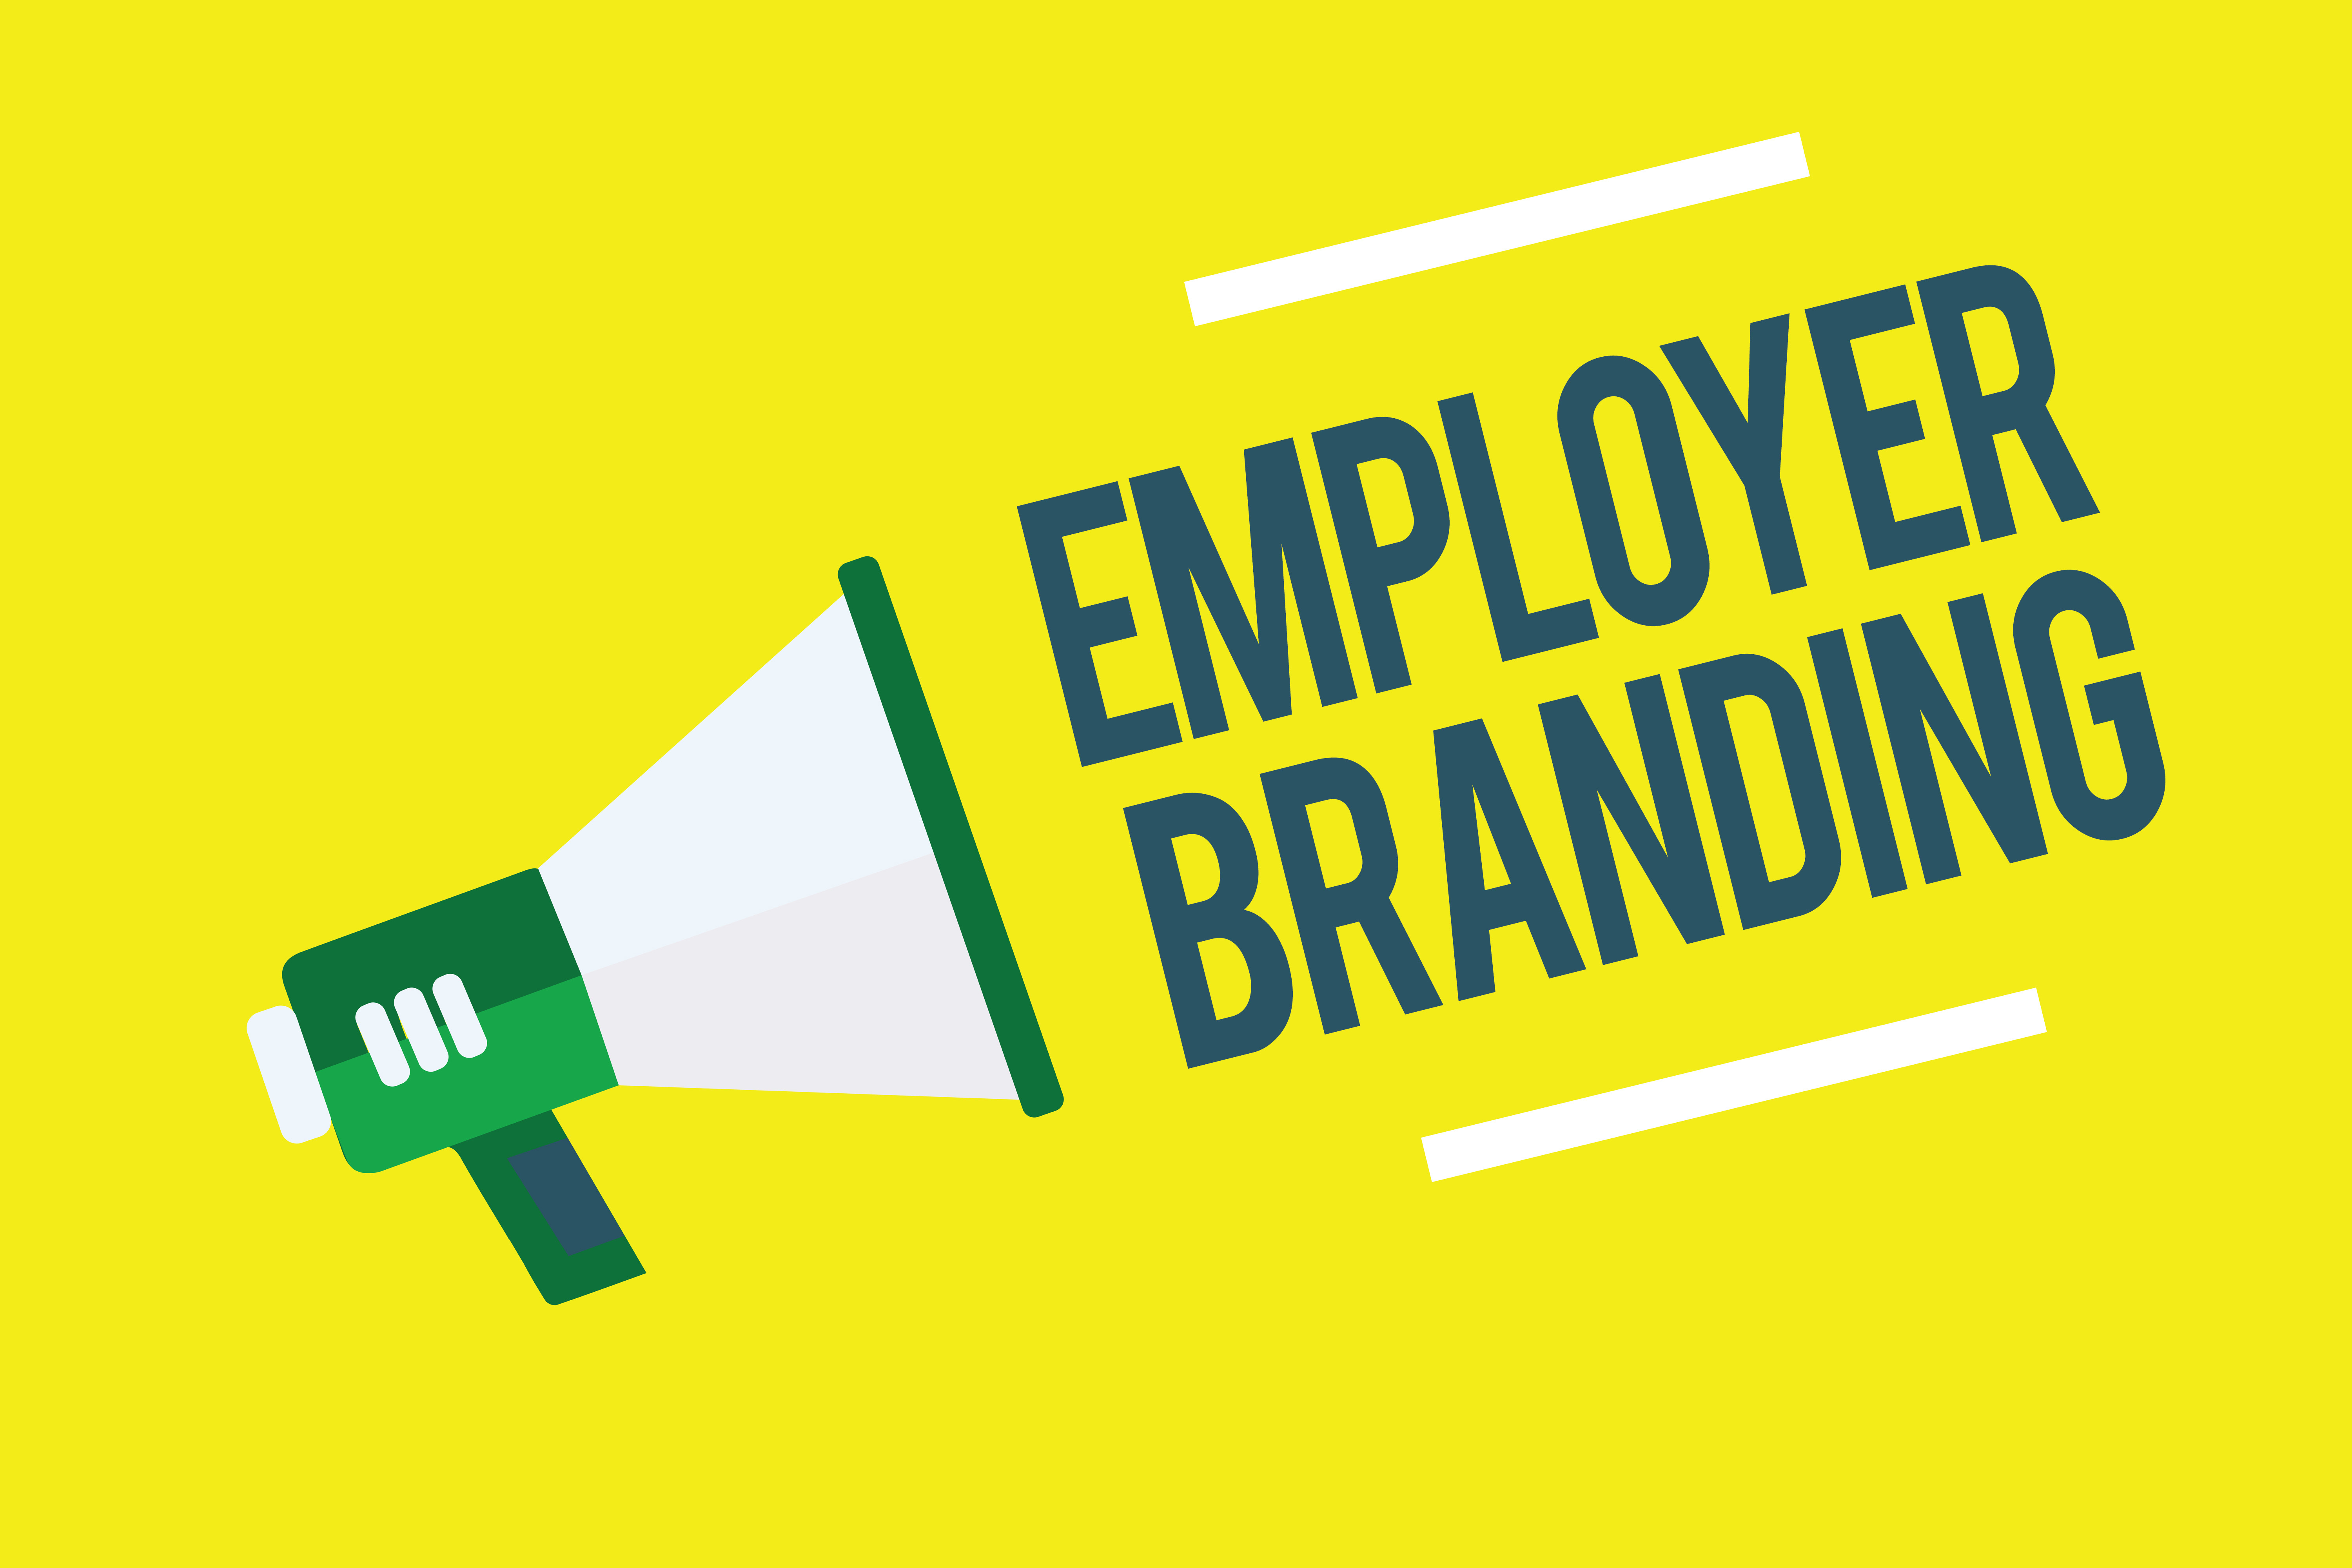 An illustration of a megaphone with words coming out from it that read: "Employer Branding."